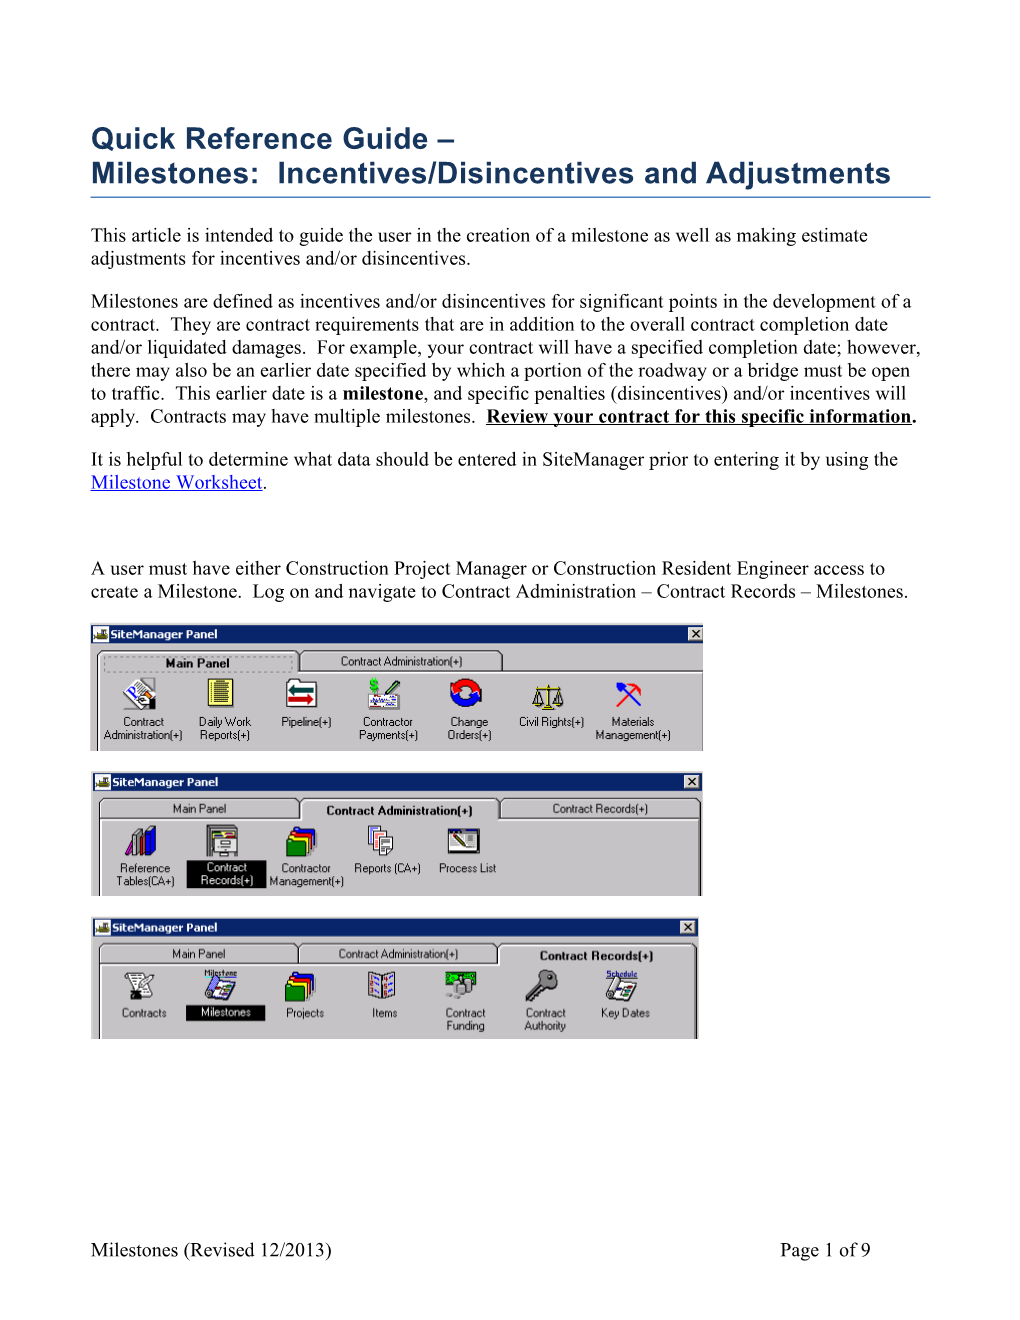 Quick Reference Guide Milestones: Incentives/Disincentives and Adjustments